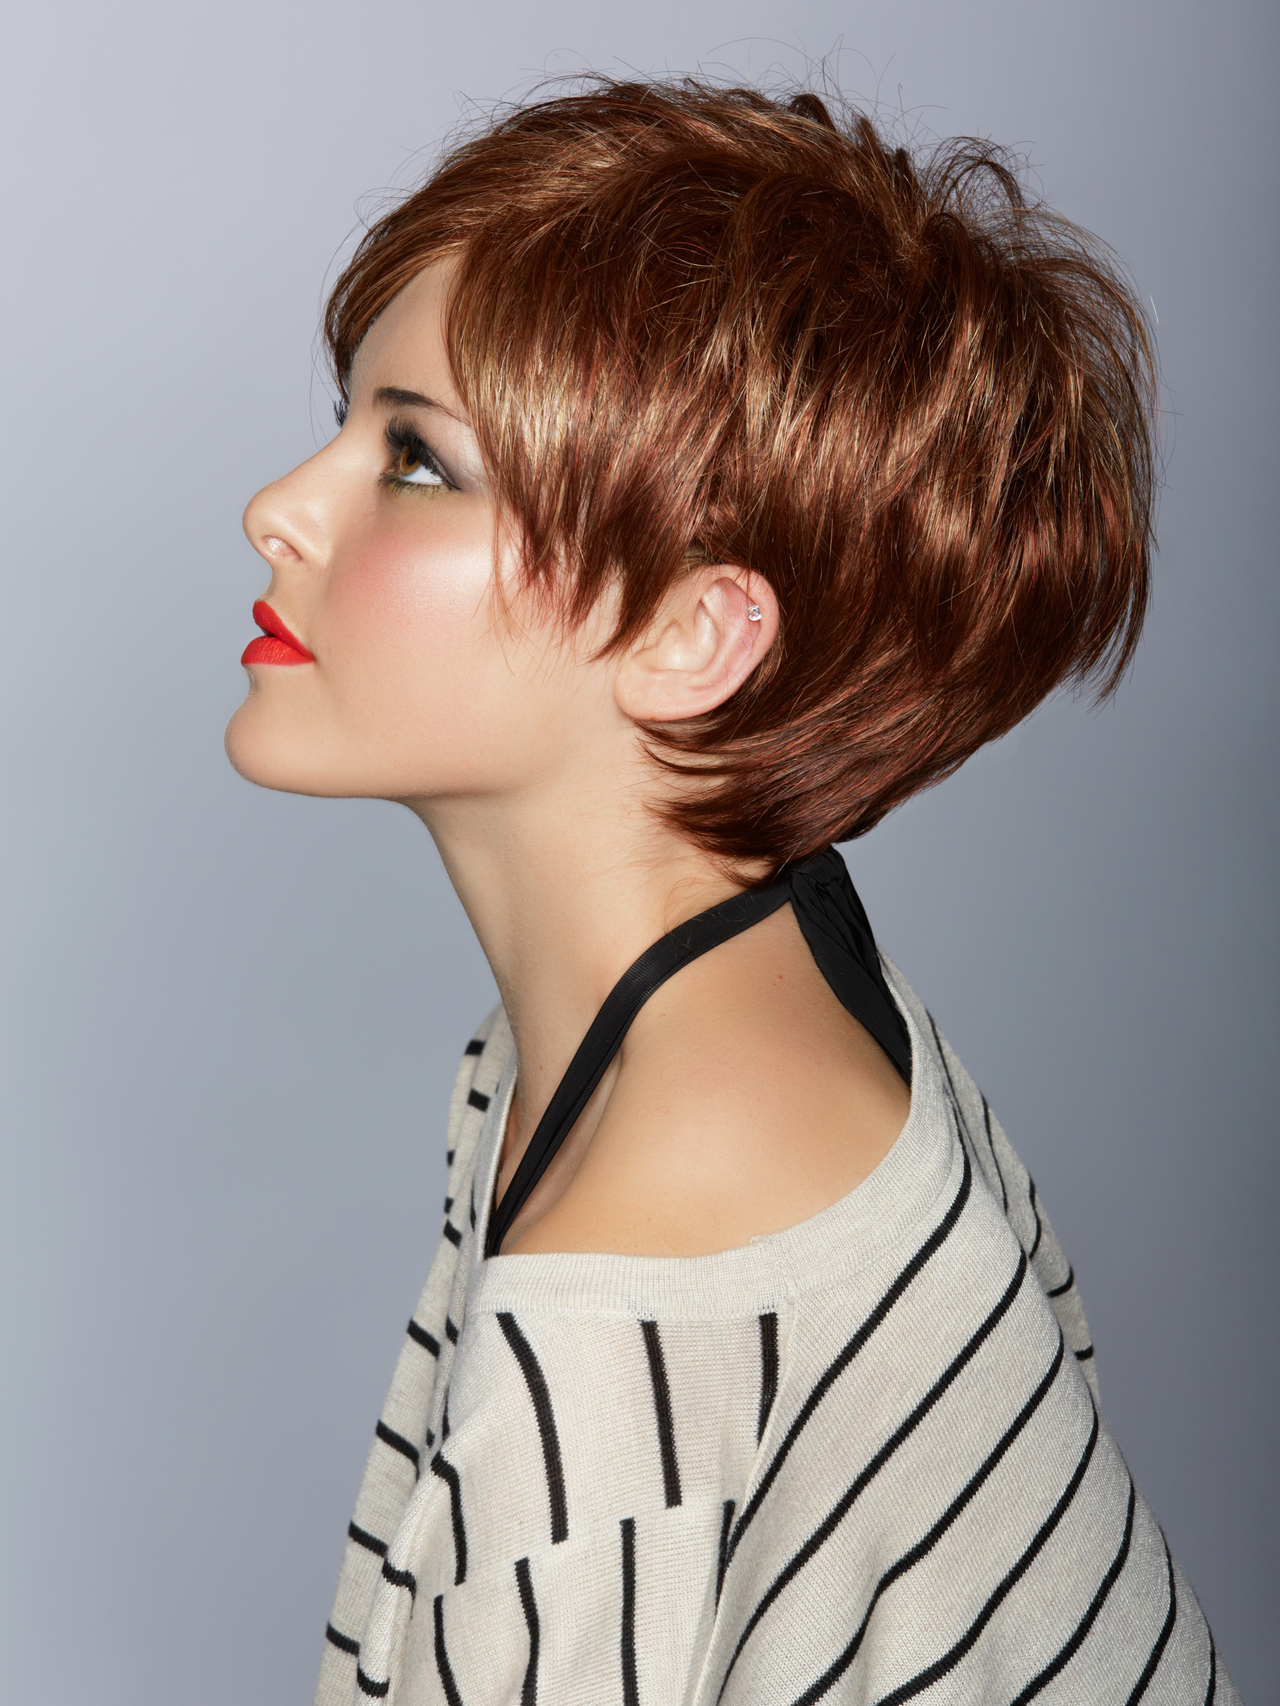 Amazing pixie cut hairstyle on a woman